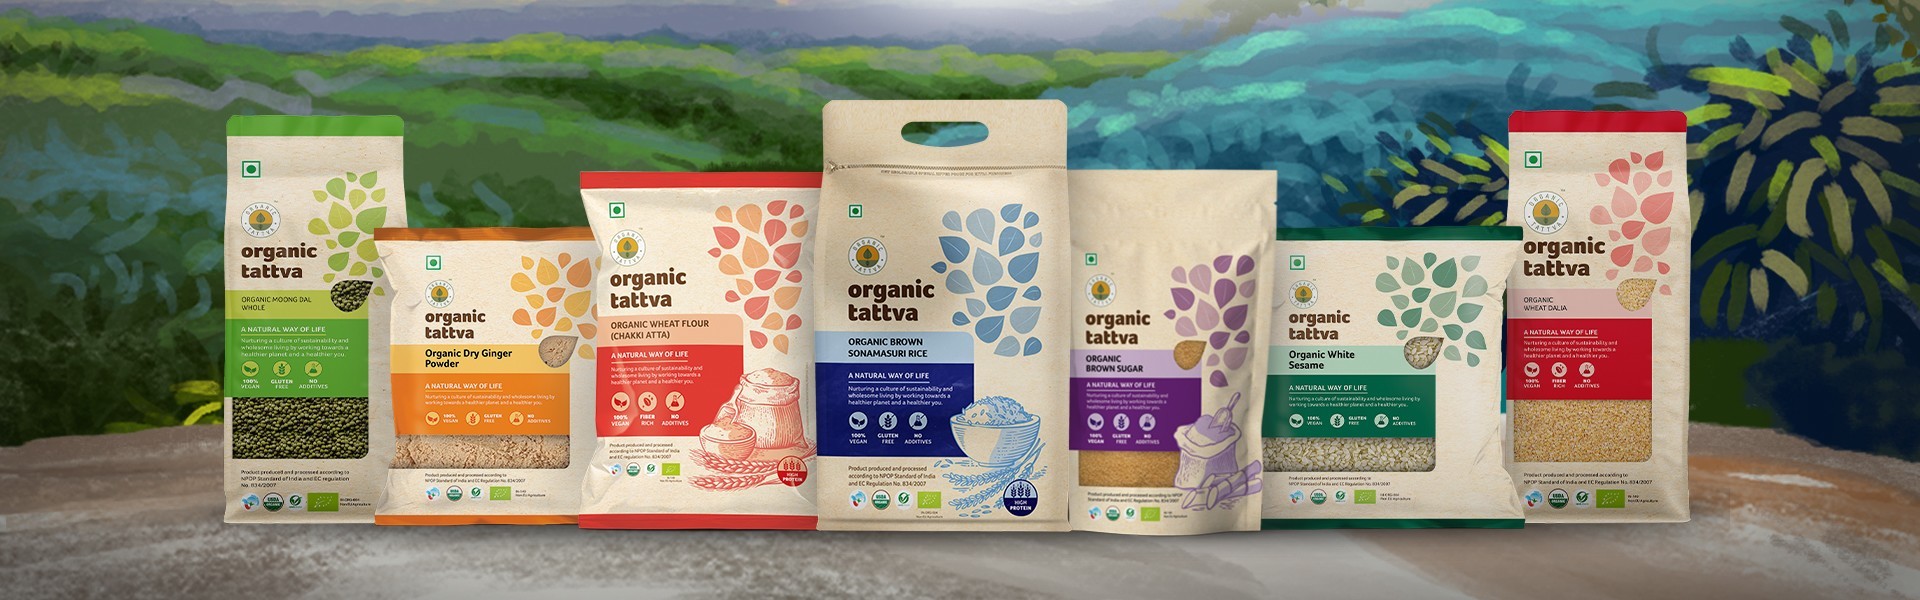 Organic Food Products 